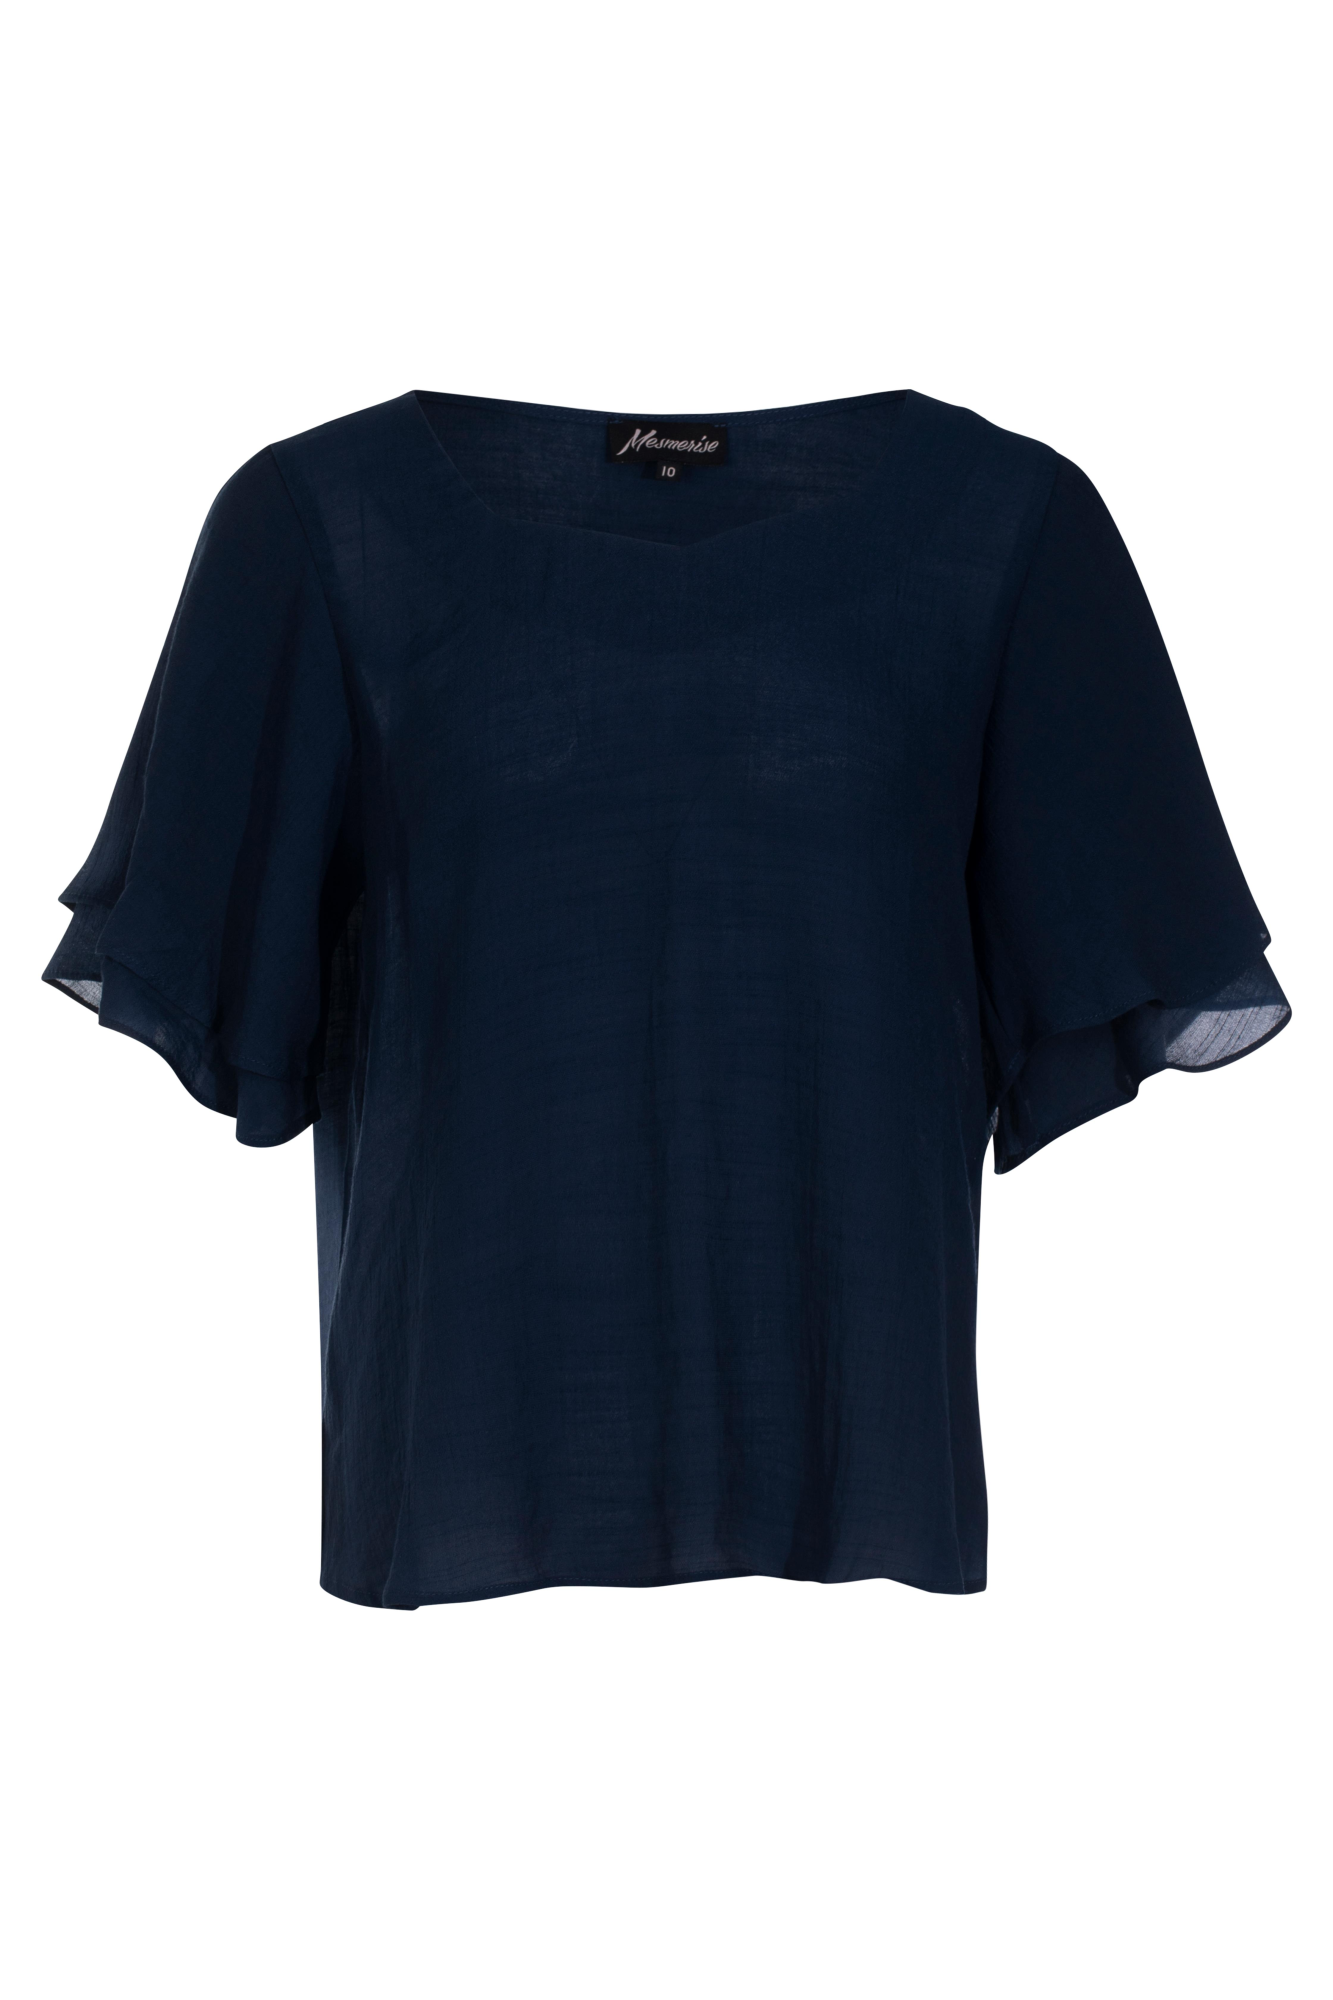 Top with double flutter sleeves | NAVY | 8822YY – Ballentynes Fashion ...